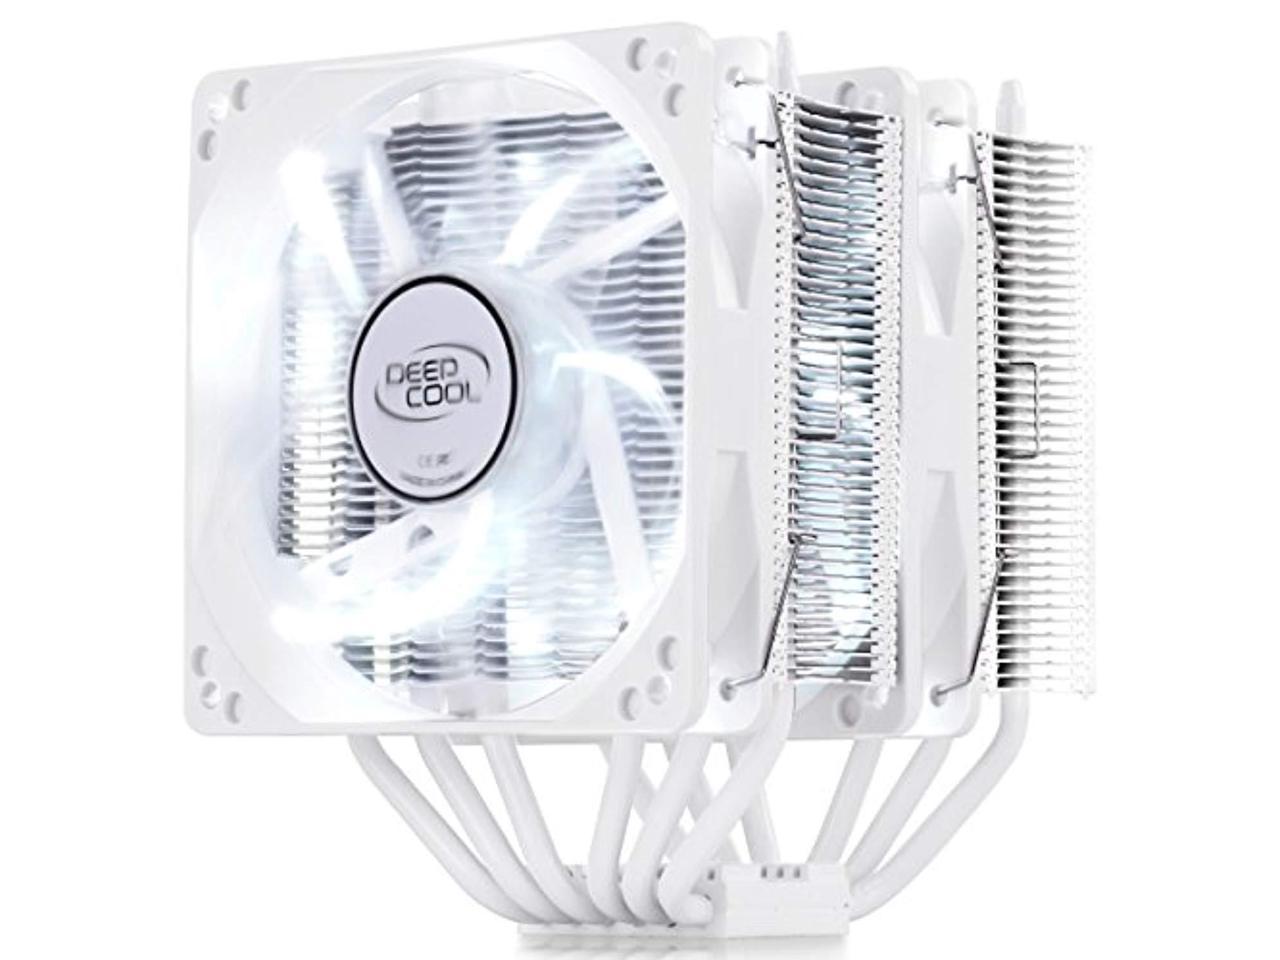 deepcool neptwin white version cpu cooler 6 heat pipes twin-tower heatsink dual 120mm white led fans (neptwin white), am4 compa